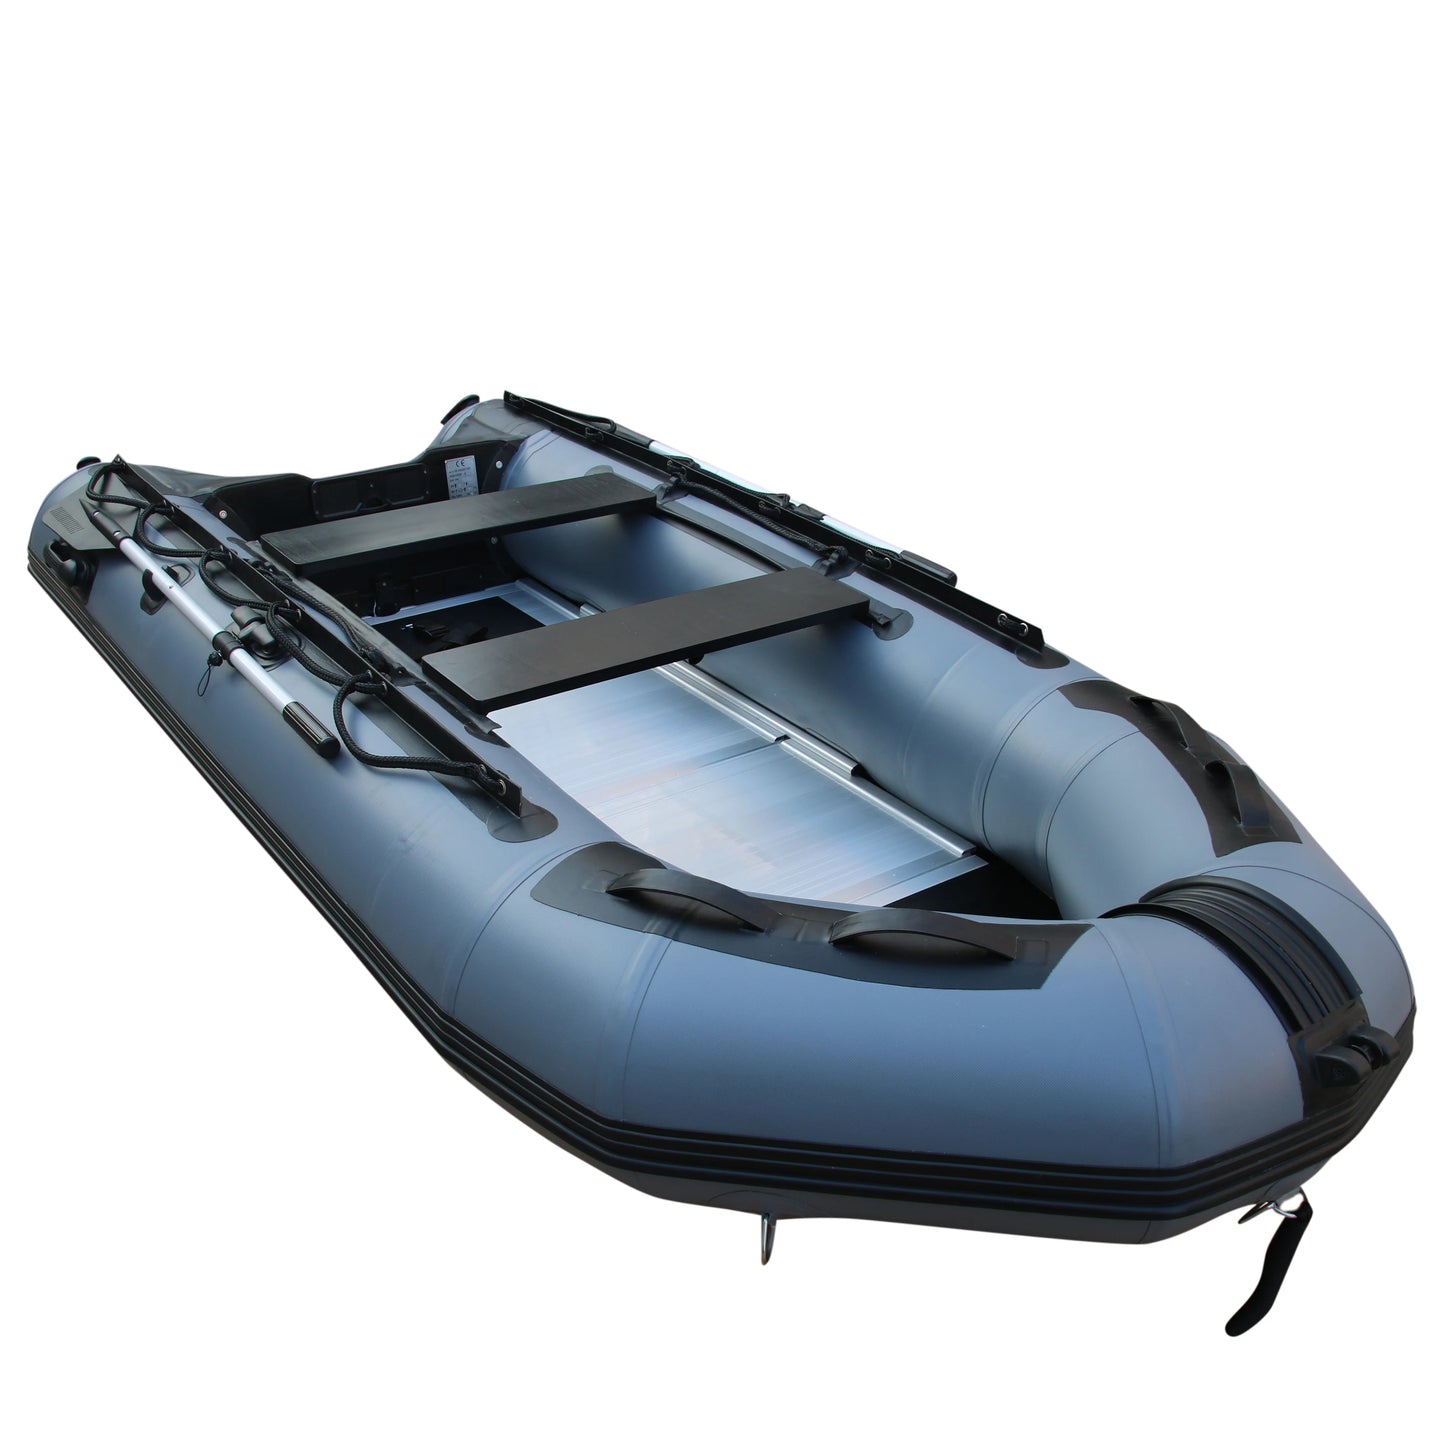 Goboat GTS330 Inflatable Boat CE PVC Waterplay Crafts With Optional Fishing Accessories Aluminum Floor Camping Equipment